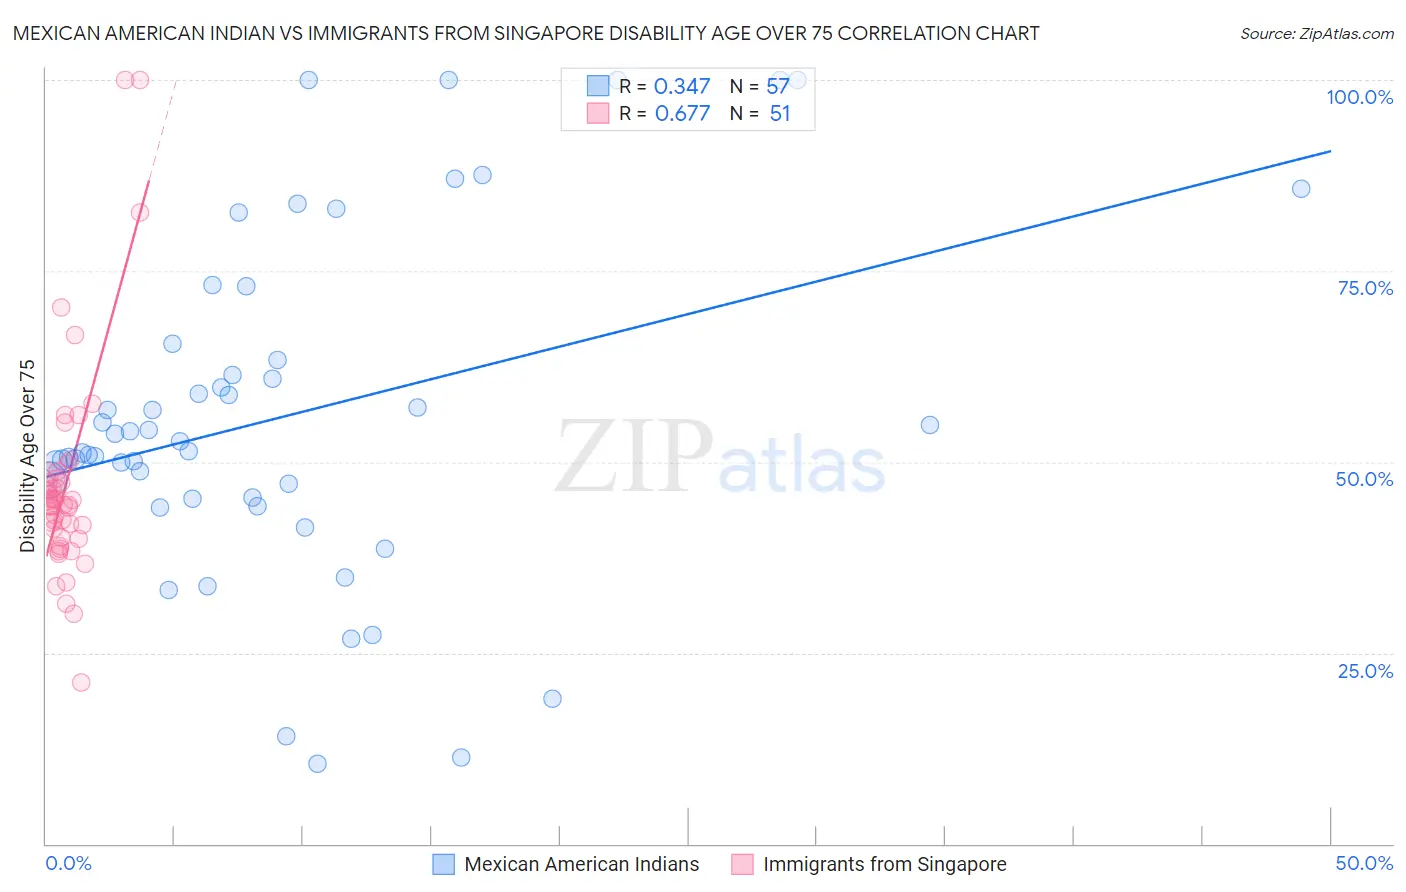 Mexican American Indian vs Immigrants from Singapore Disability Age Over 75